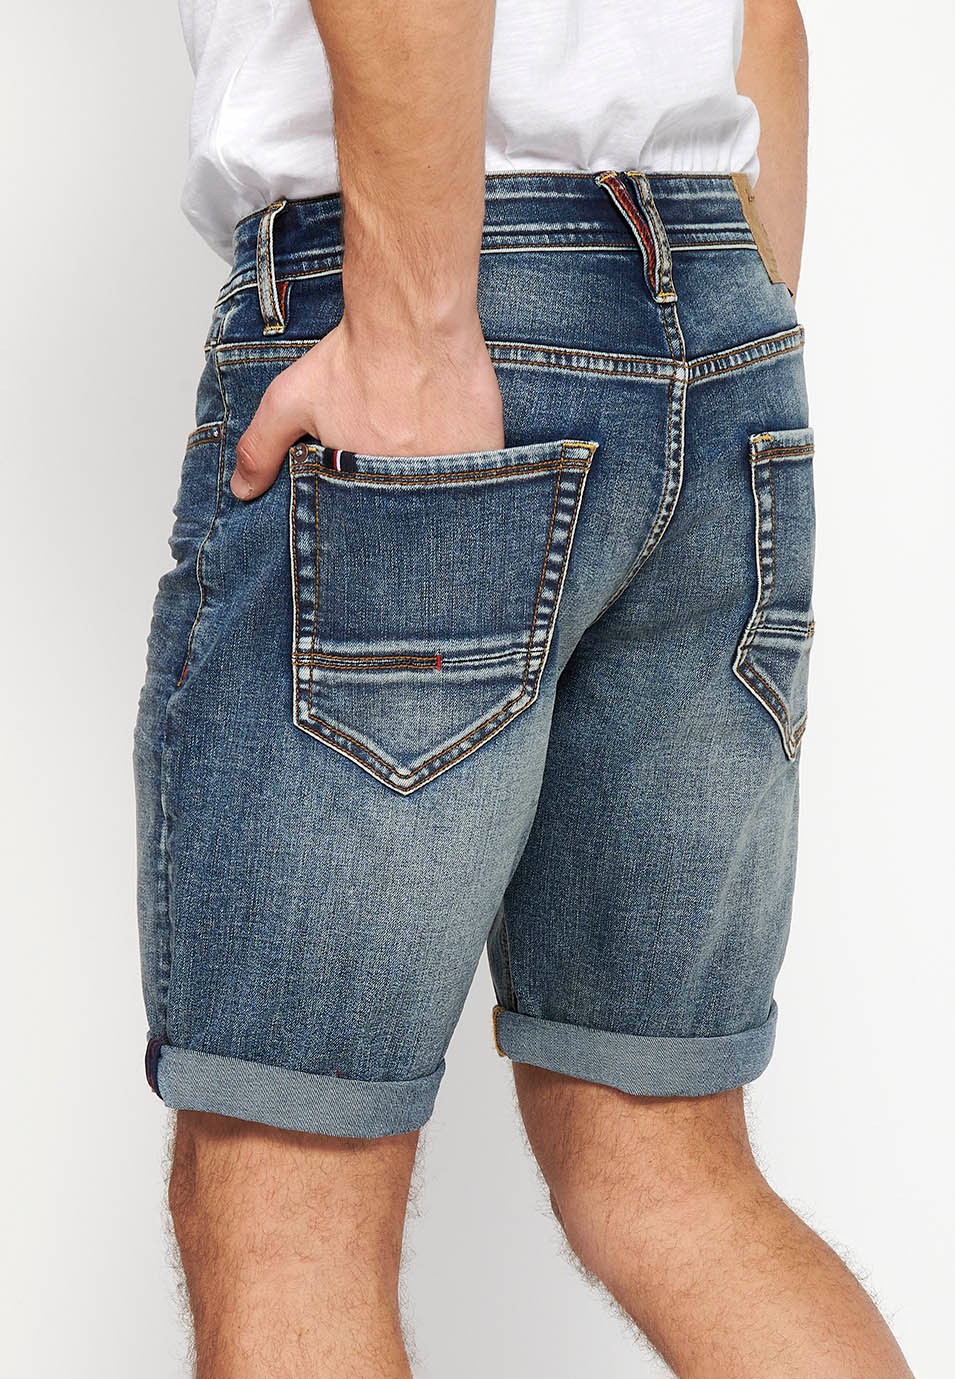 Denim Bermuda Shorts with Front Closure with Zipper and Button with Five Pockets, One Pocket Pocket, Blue Color for Men 8